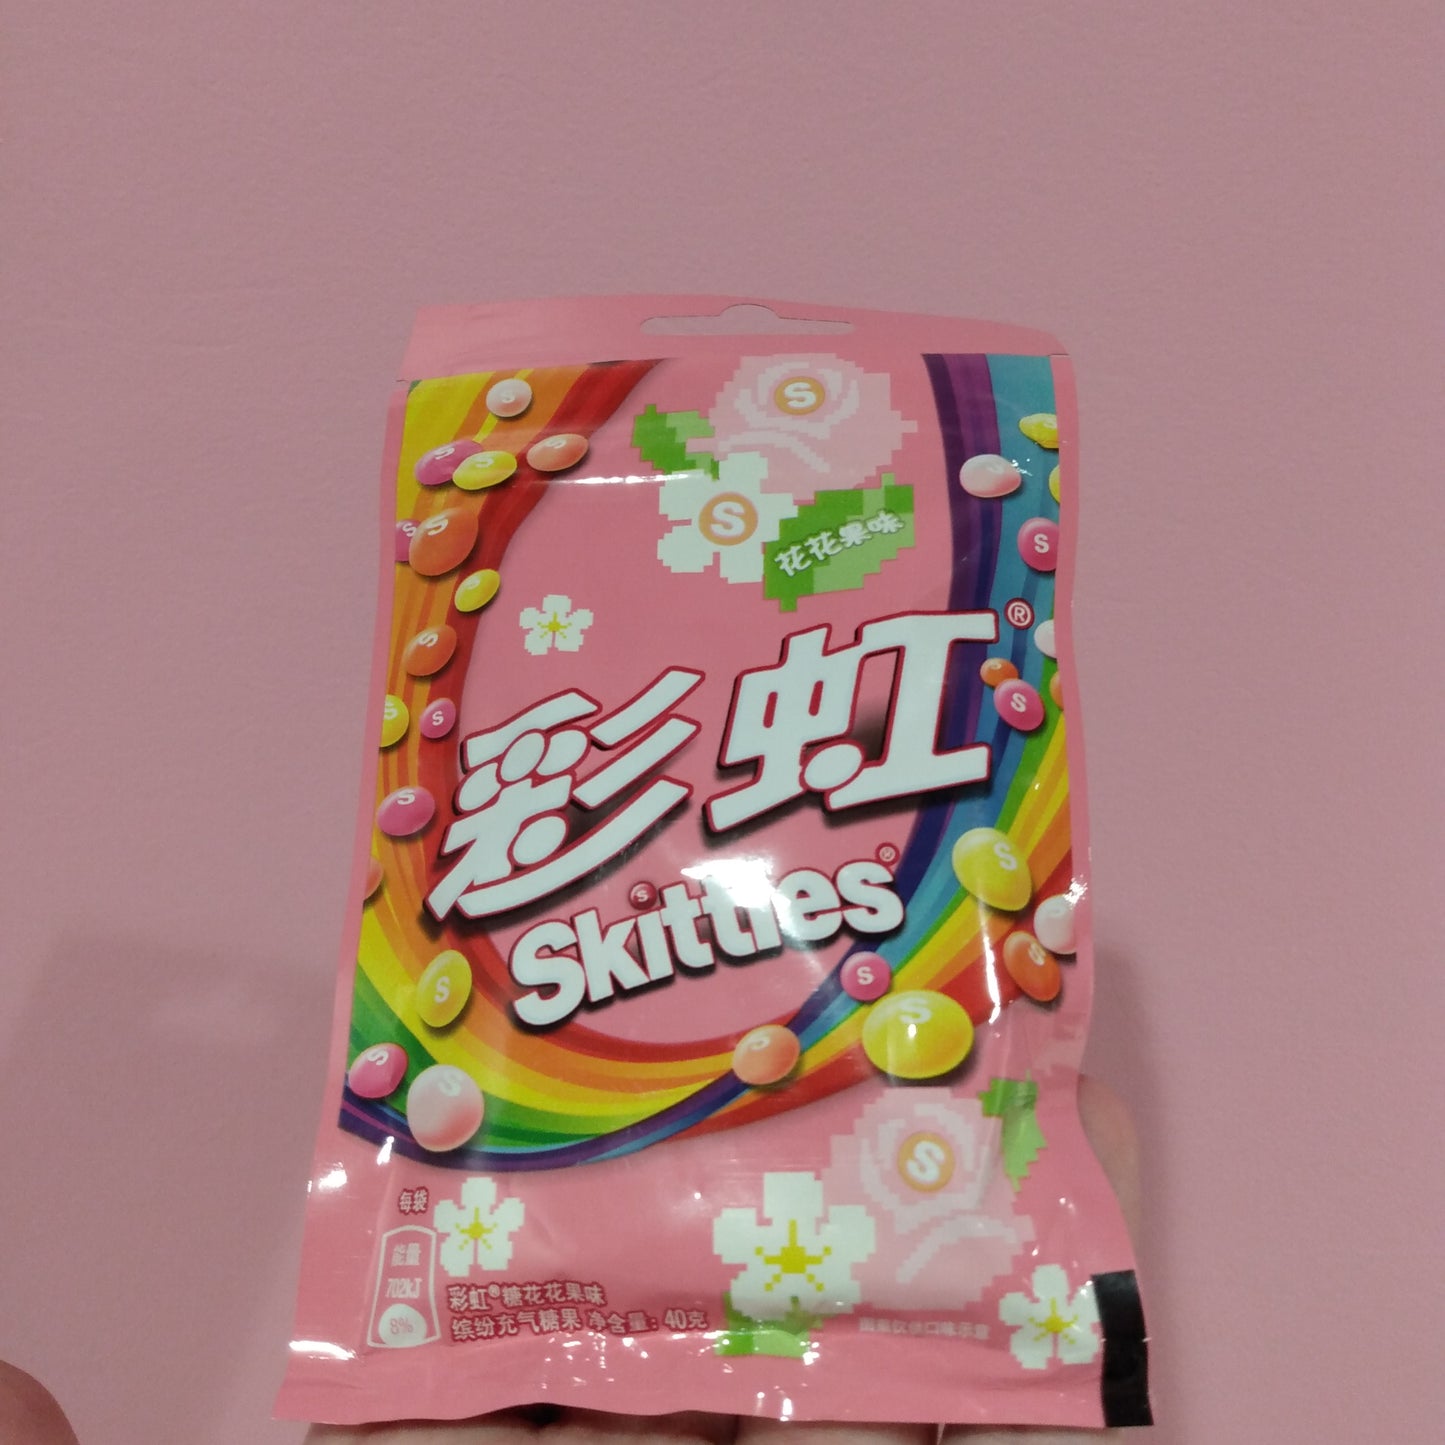 Skittles floral and fruity